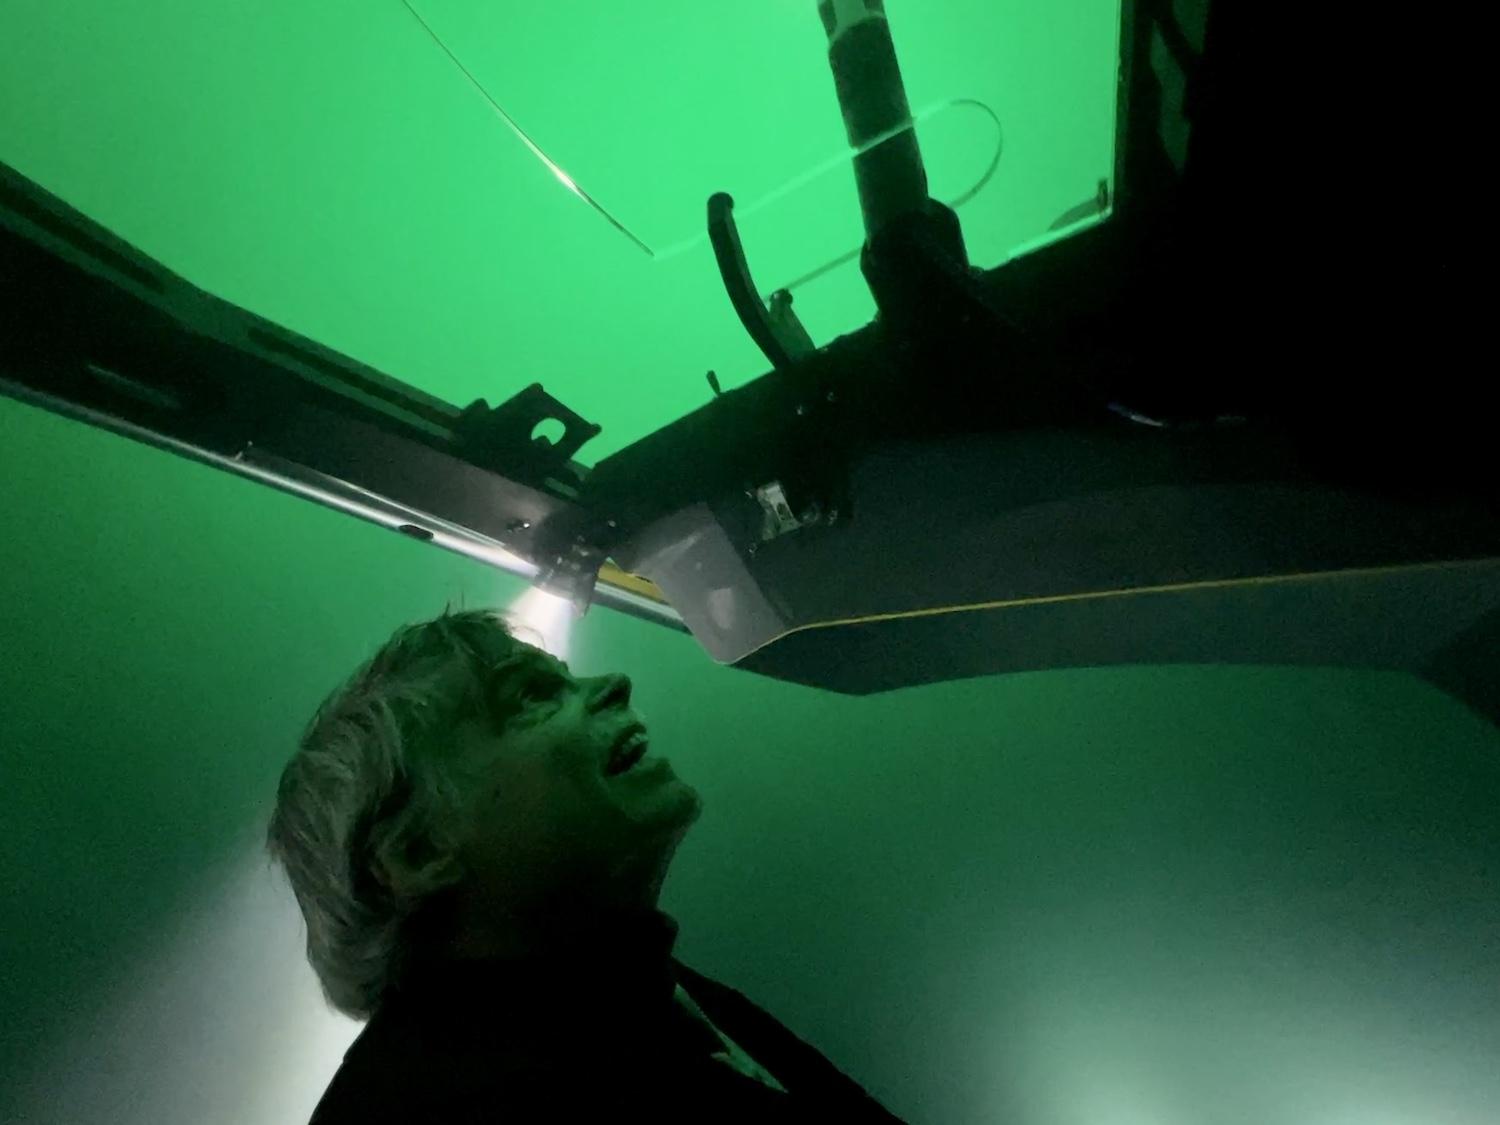 Viking guest Bob Palmer scans Lake Superior from his seat inside a six-passenger yellow submersible named John.